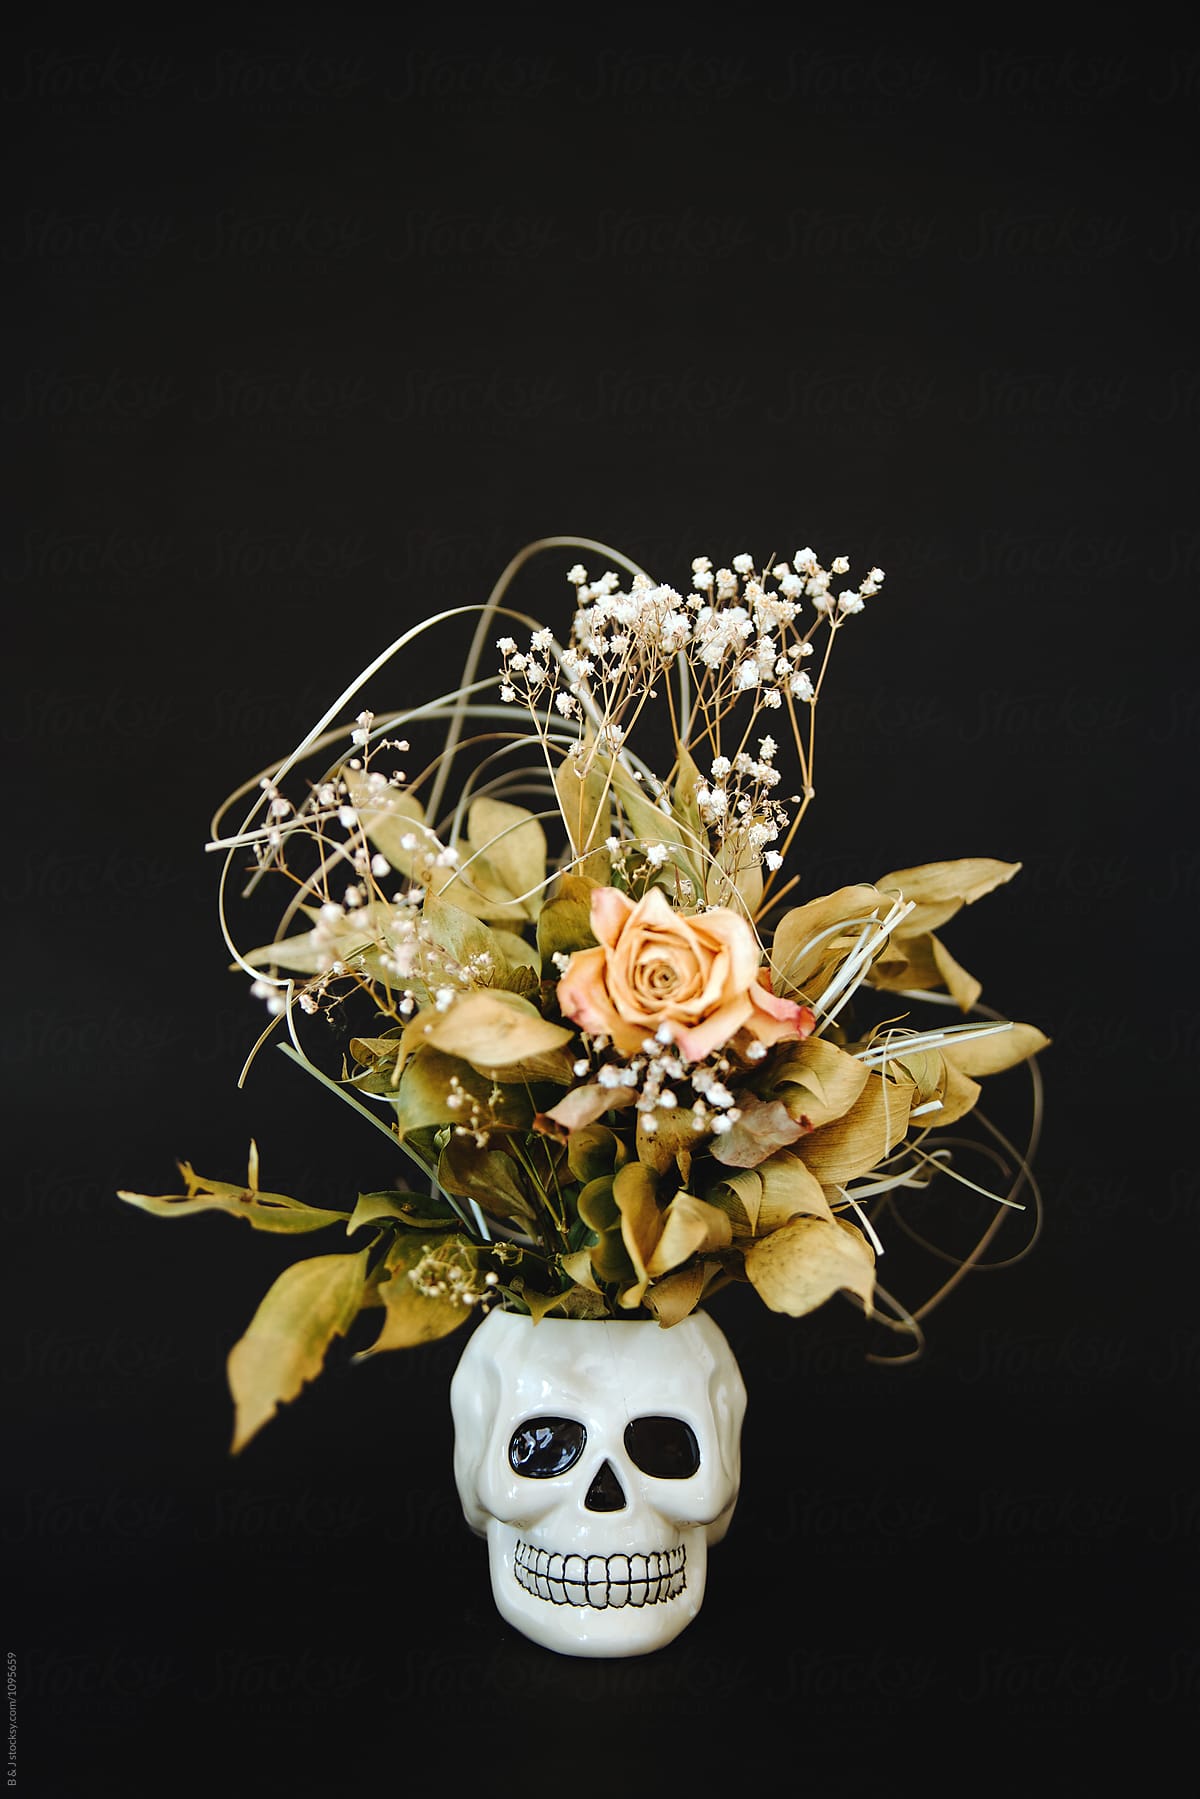 Ceramic skull with dried flowers on a black background